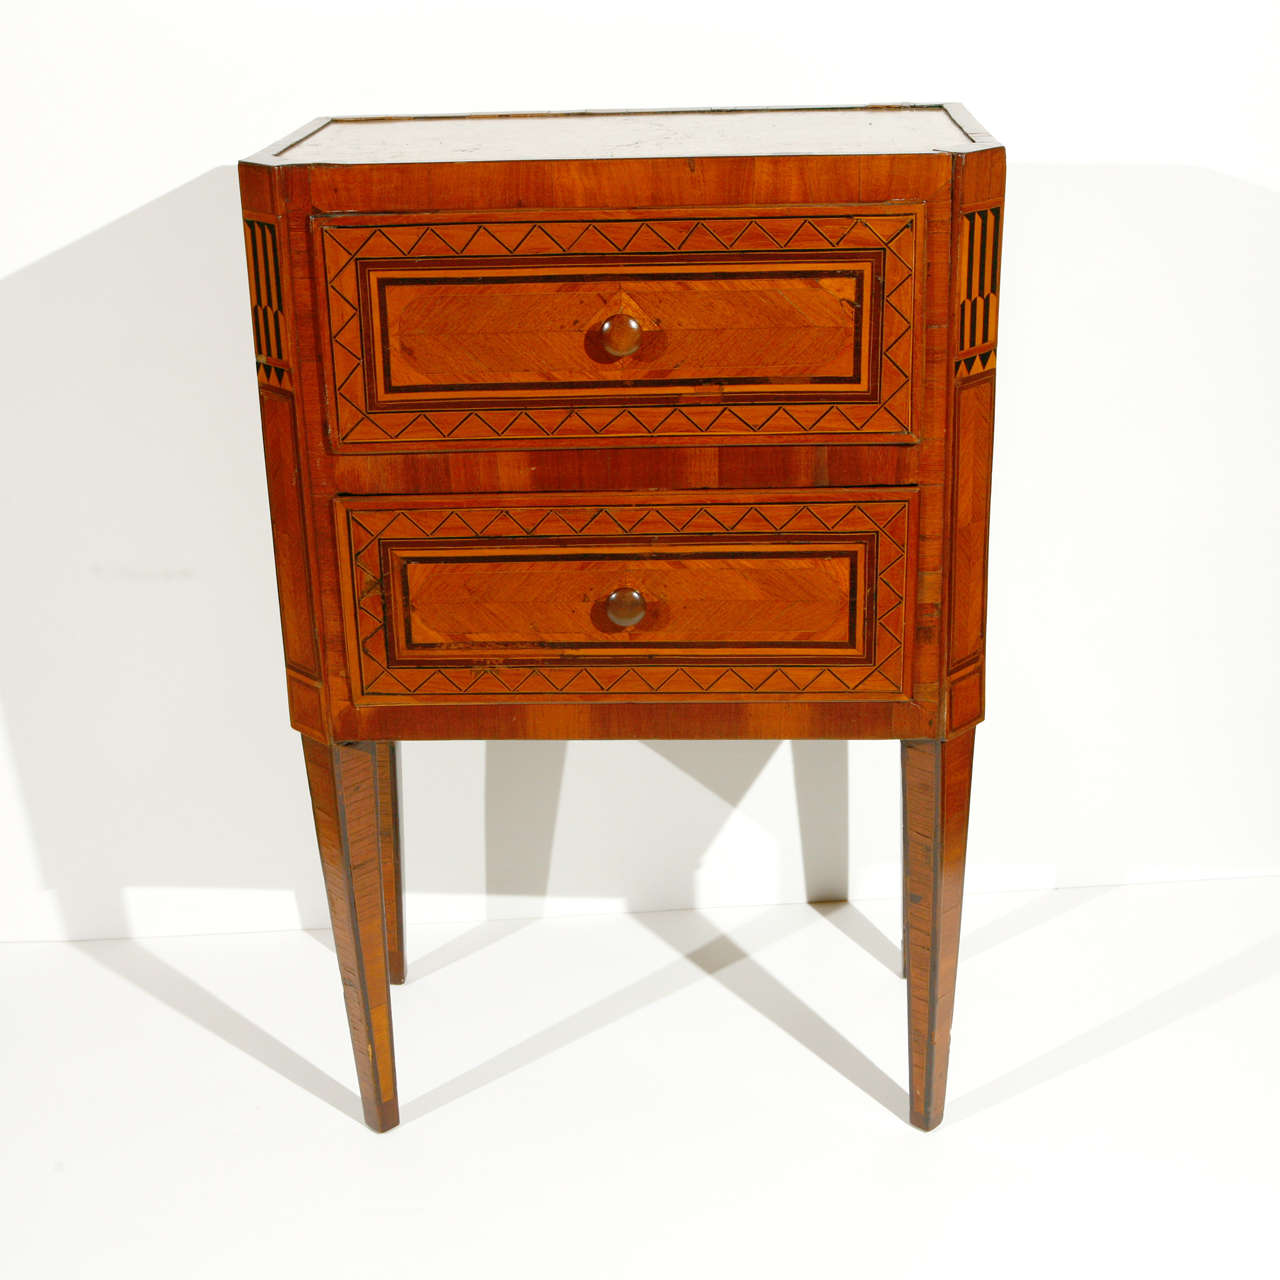 Two-drawer, Neoclasssical, parquetry, bedside table with inset, marble top.